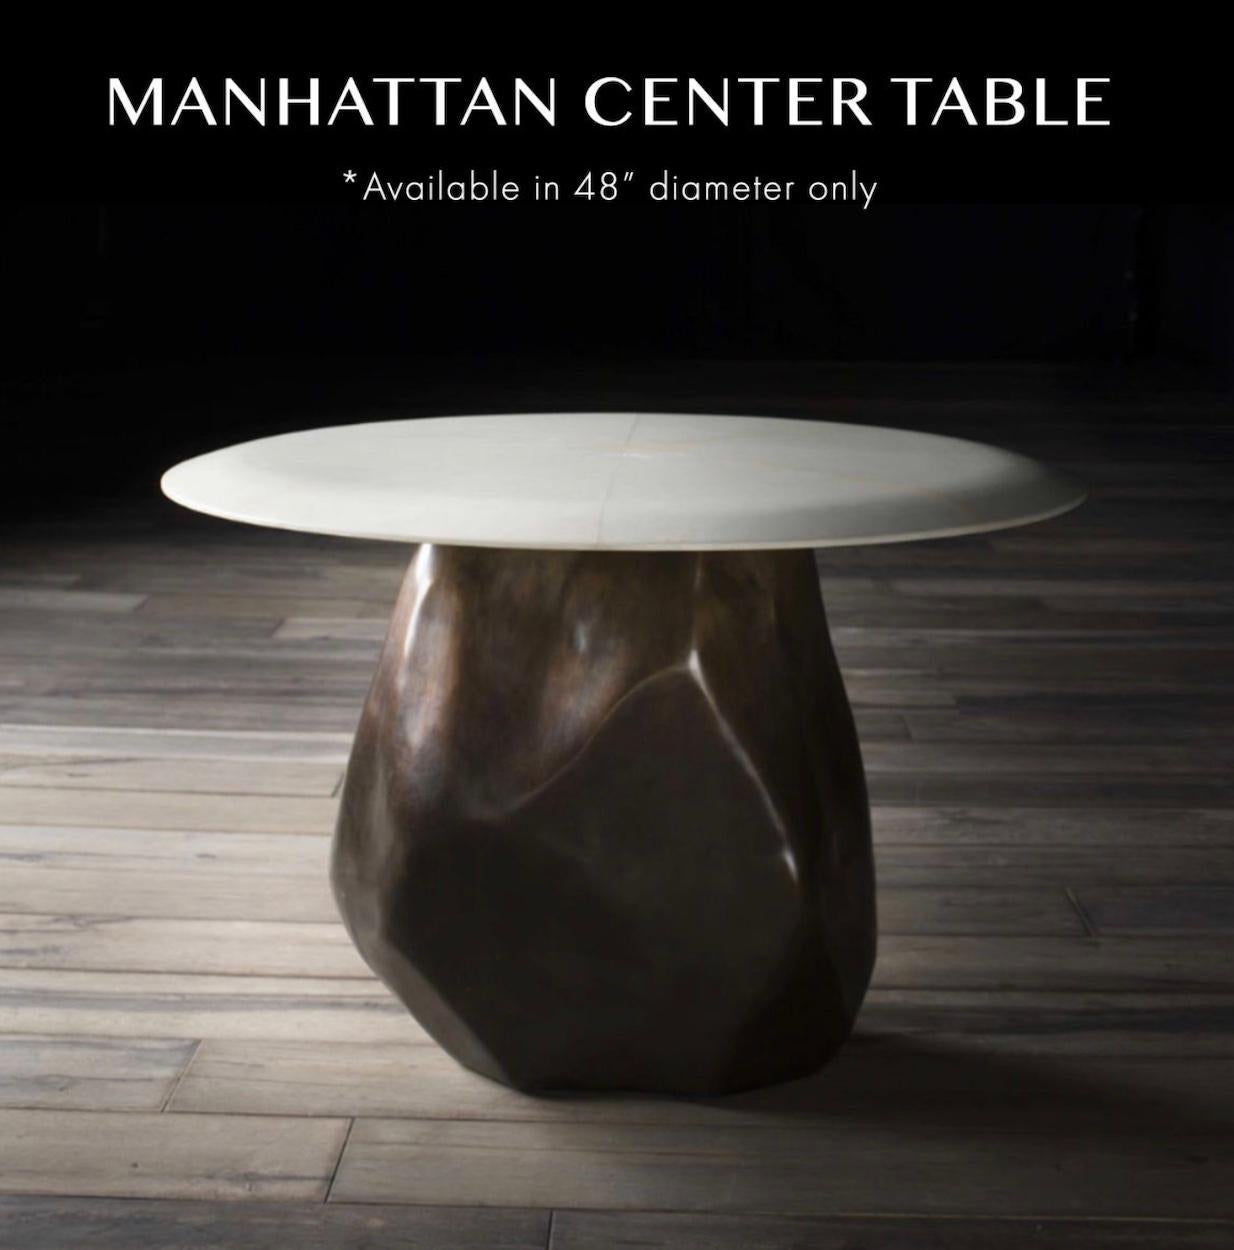 Available now and ready to ship! 

Manhattan Center Table in Bronze by Elan Atelier

The Manhattan center table is inspired by natural rock formations and earths natural sculptural shapes.
We utilize the ancient lost wax casting method to hand pour